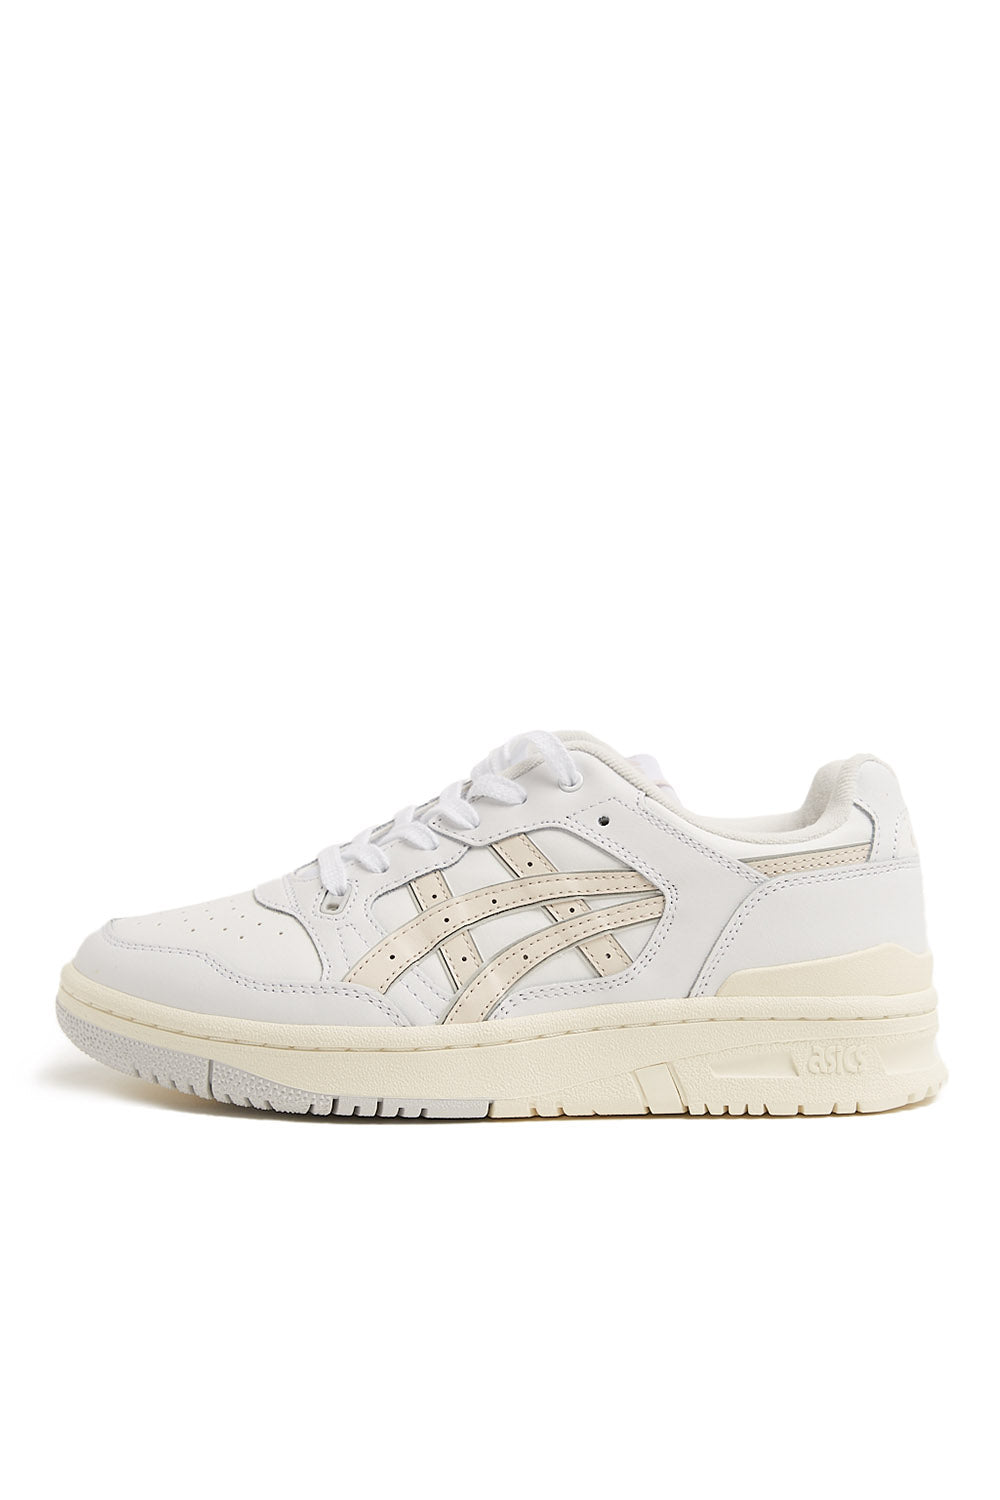 Asics EX89 'White/Mineral Beige' | ROOTED